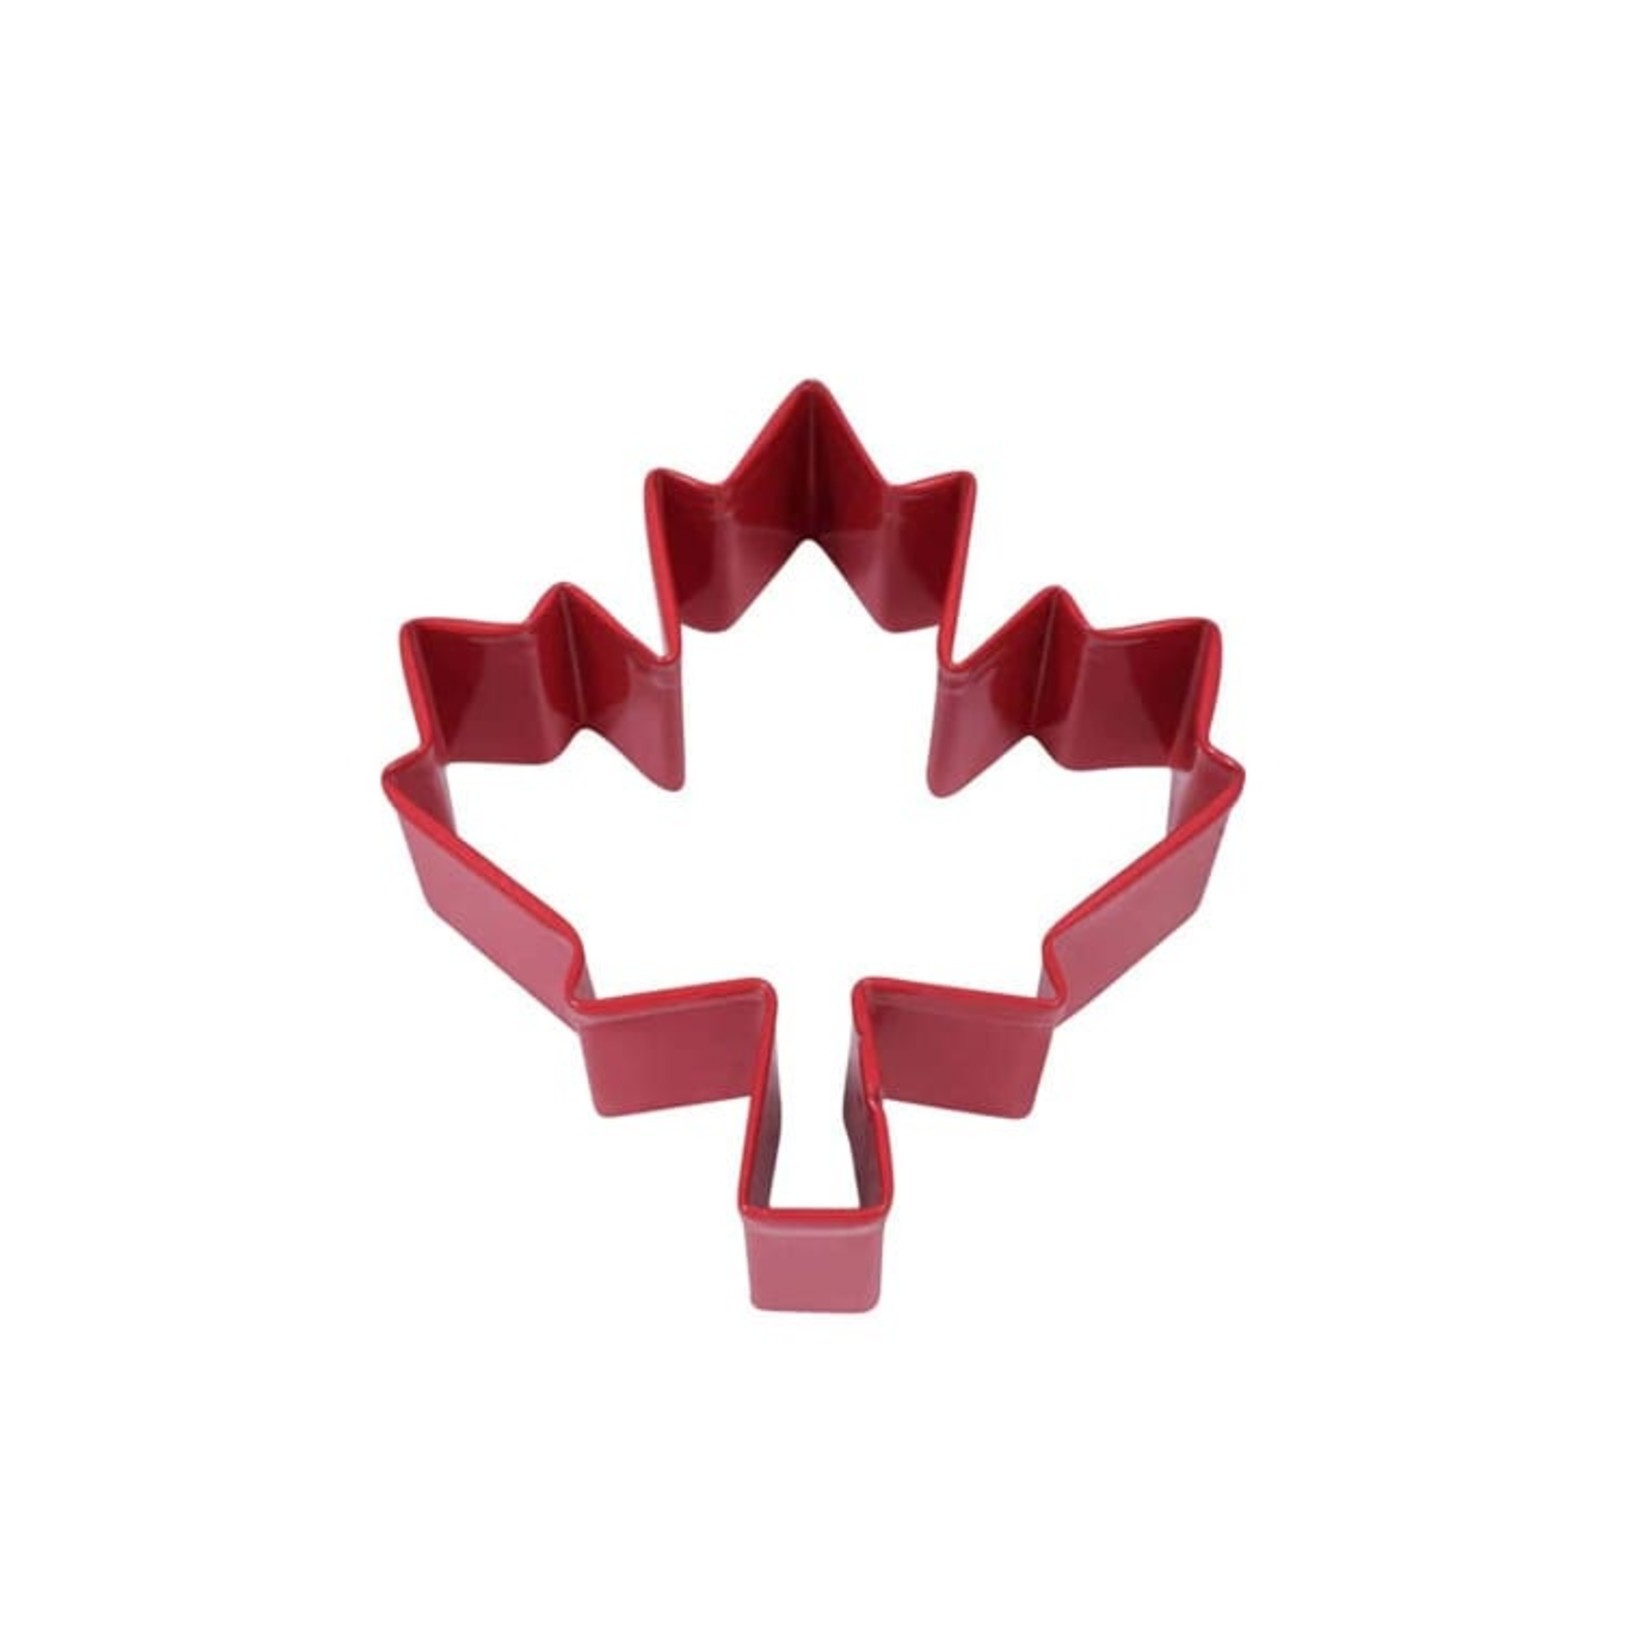 R&M INTERNATIONAL R&M Cookie Cutter Maple Leaf Canadian National 3” - Red